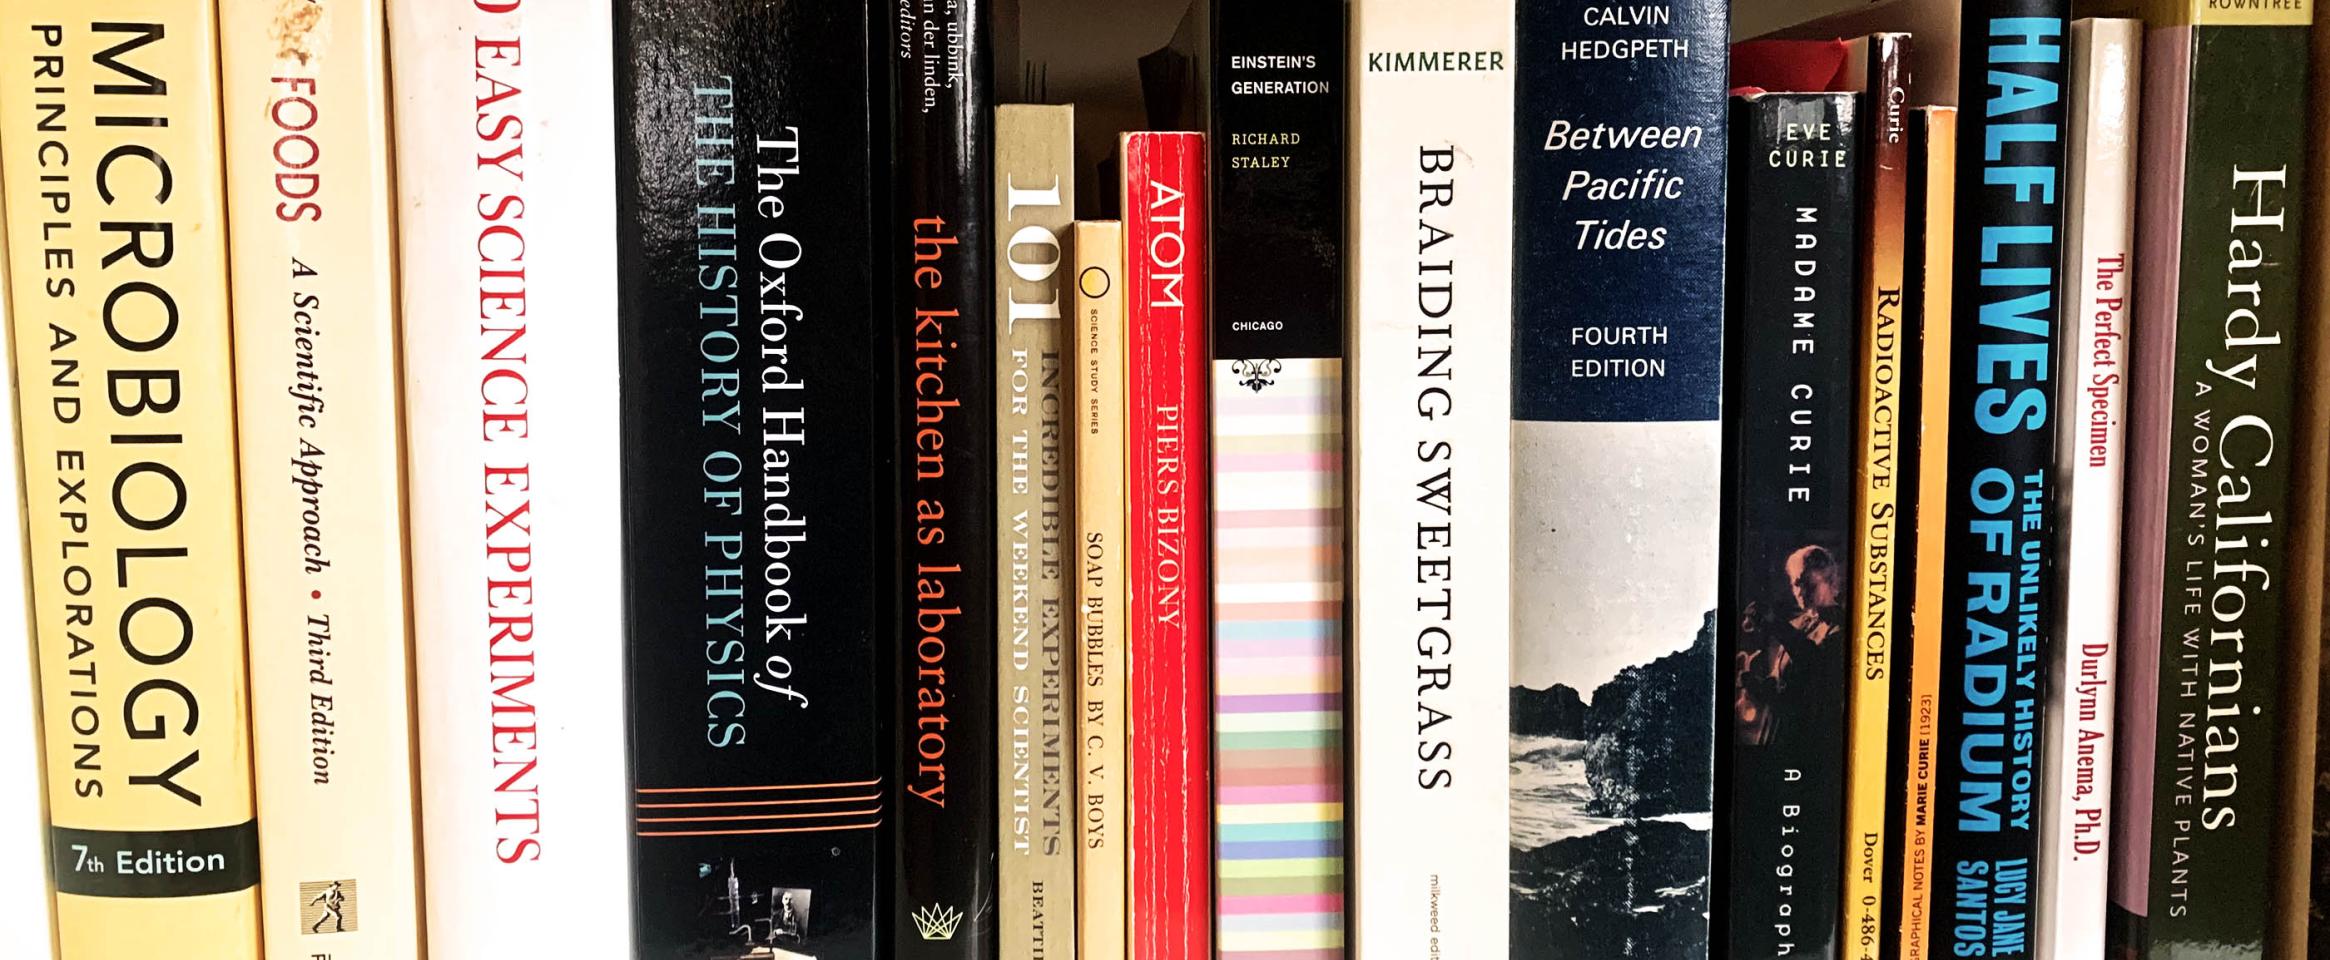 Rectangular photo of a closeup of books on a shelf, spanning titles on science, California, and microbiology. Photo by Liz Lee Heinecke